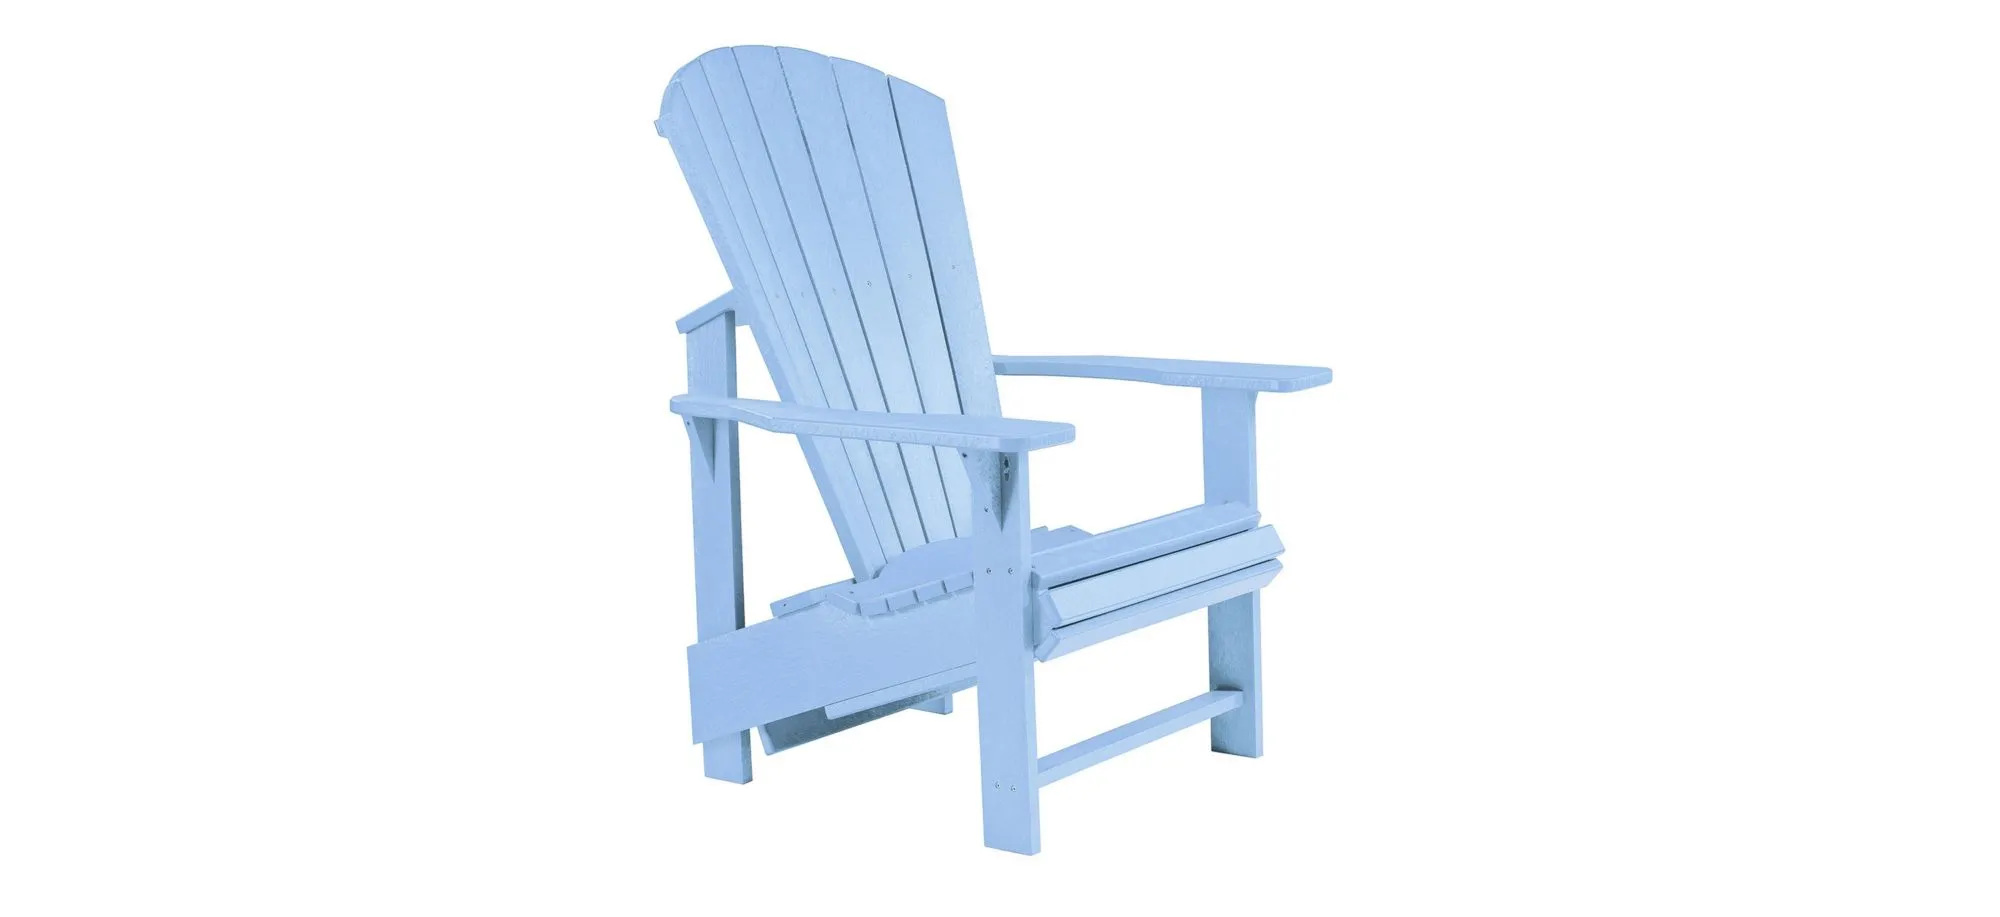 Generation Recycled Outdoor Upright Adirondack Chair in Sky Blue by C.R. Plastic Products